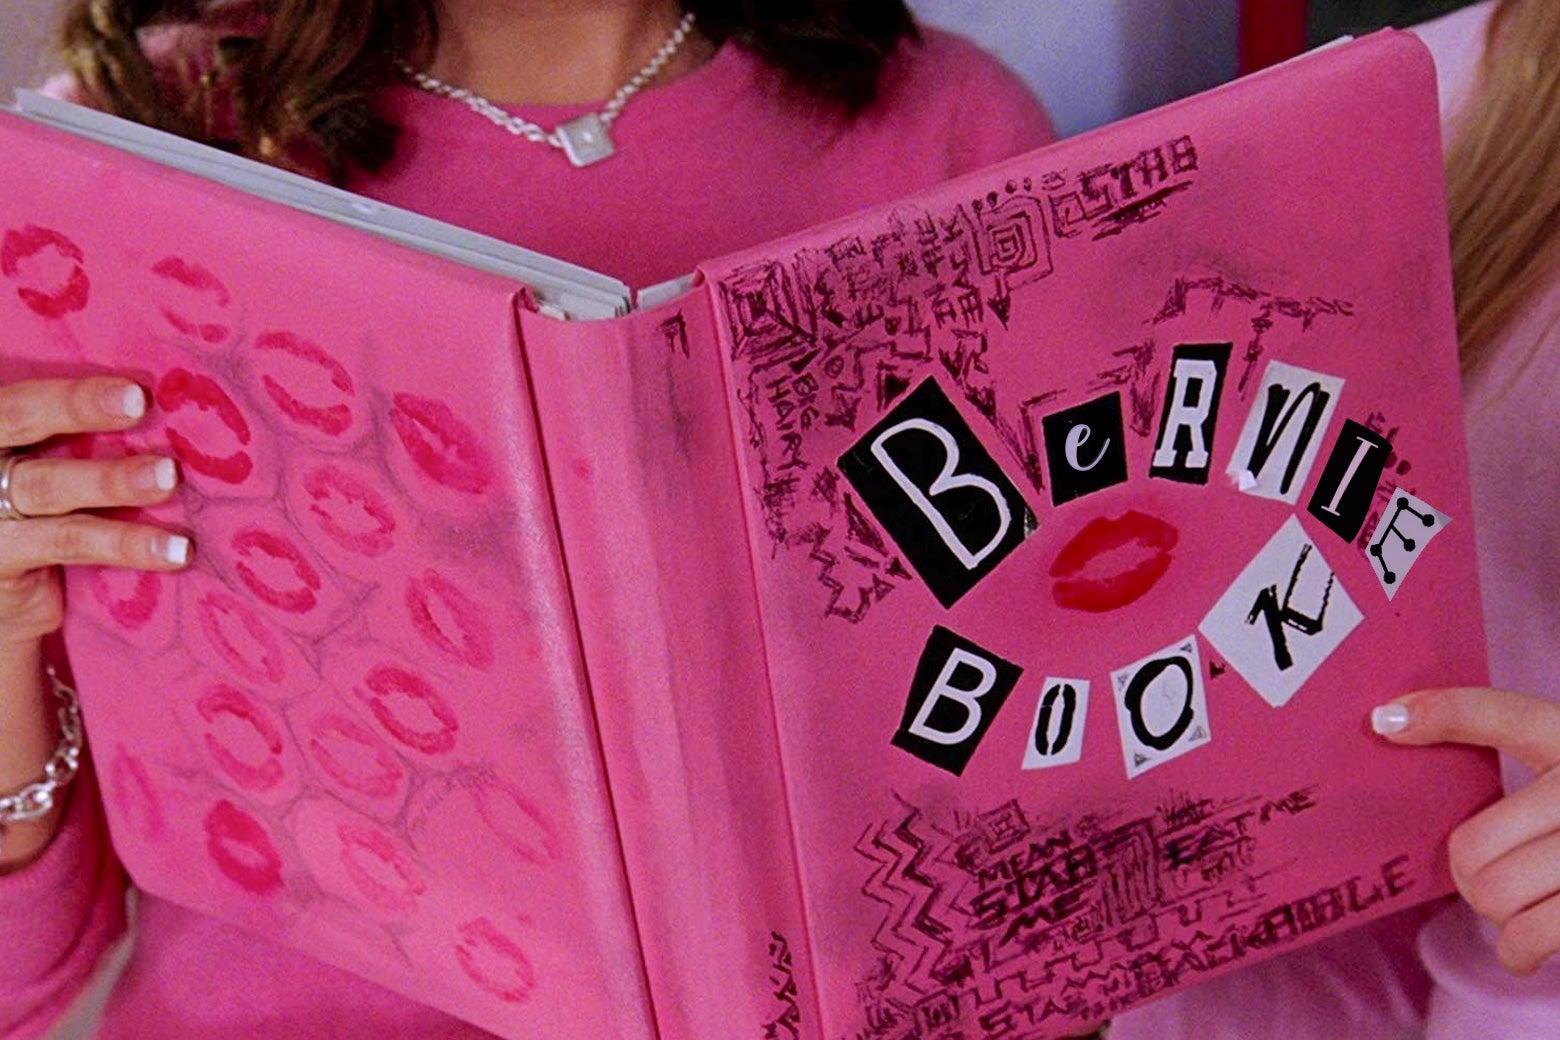 Hands hold up a pink book that says "Bernie Book" on the front.